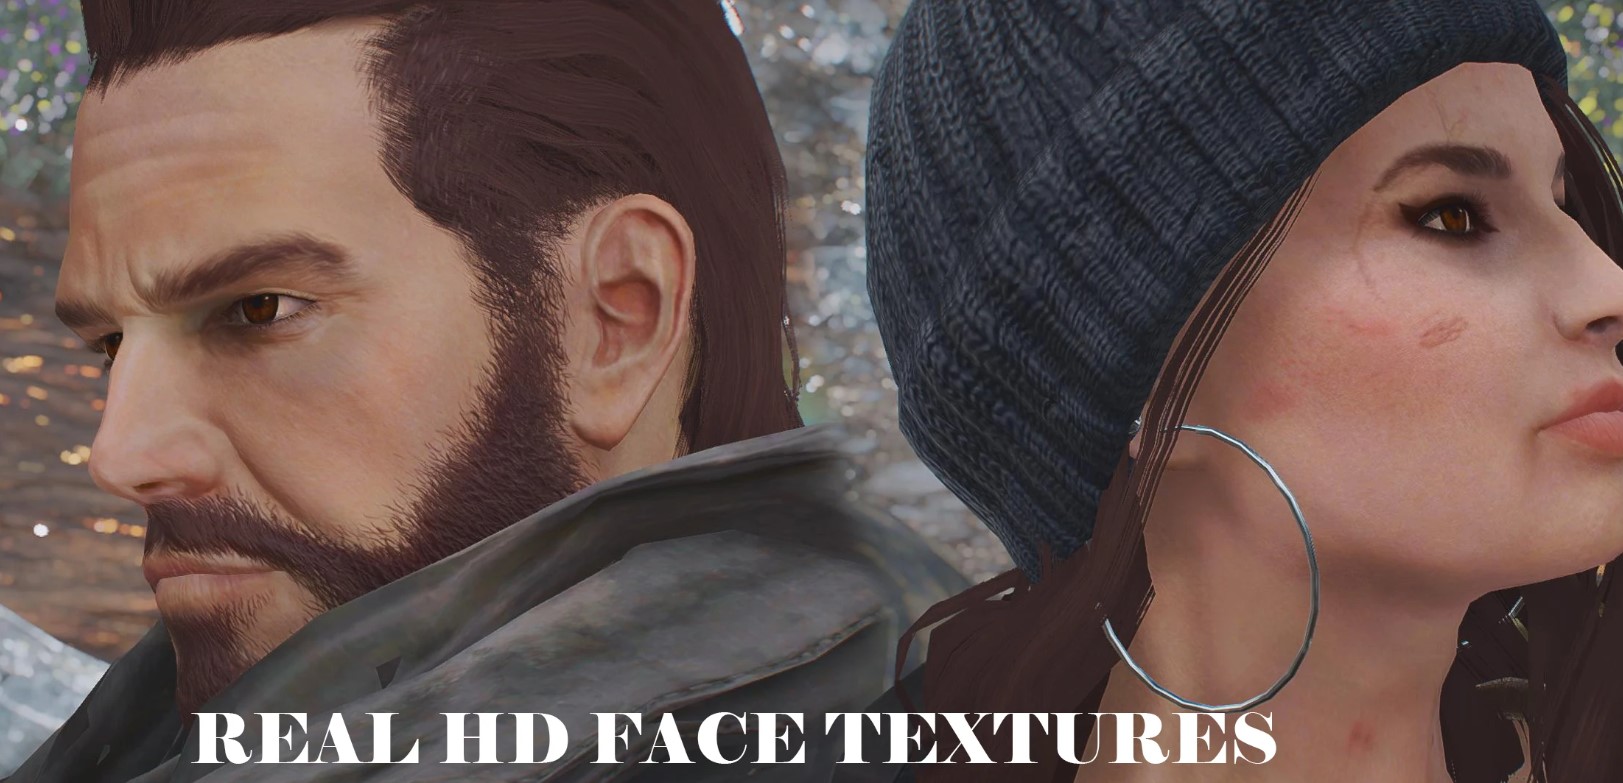 Real hd face textures 2k fallout 4 фото 4